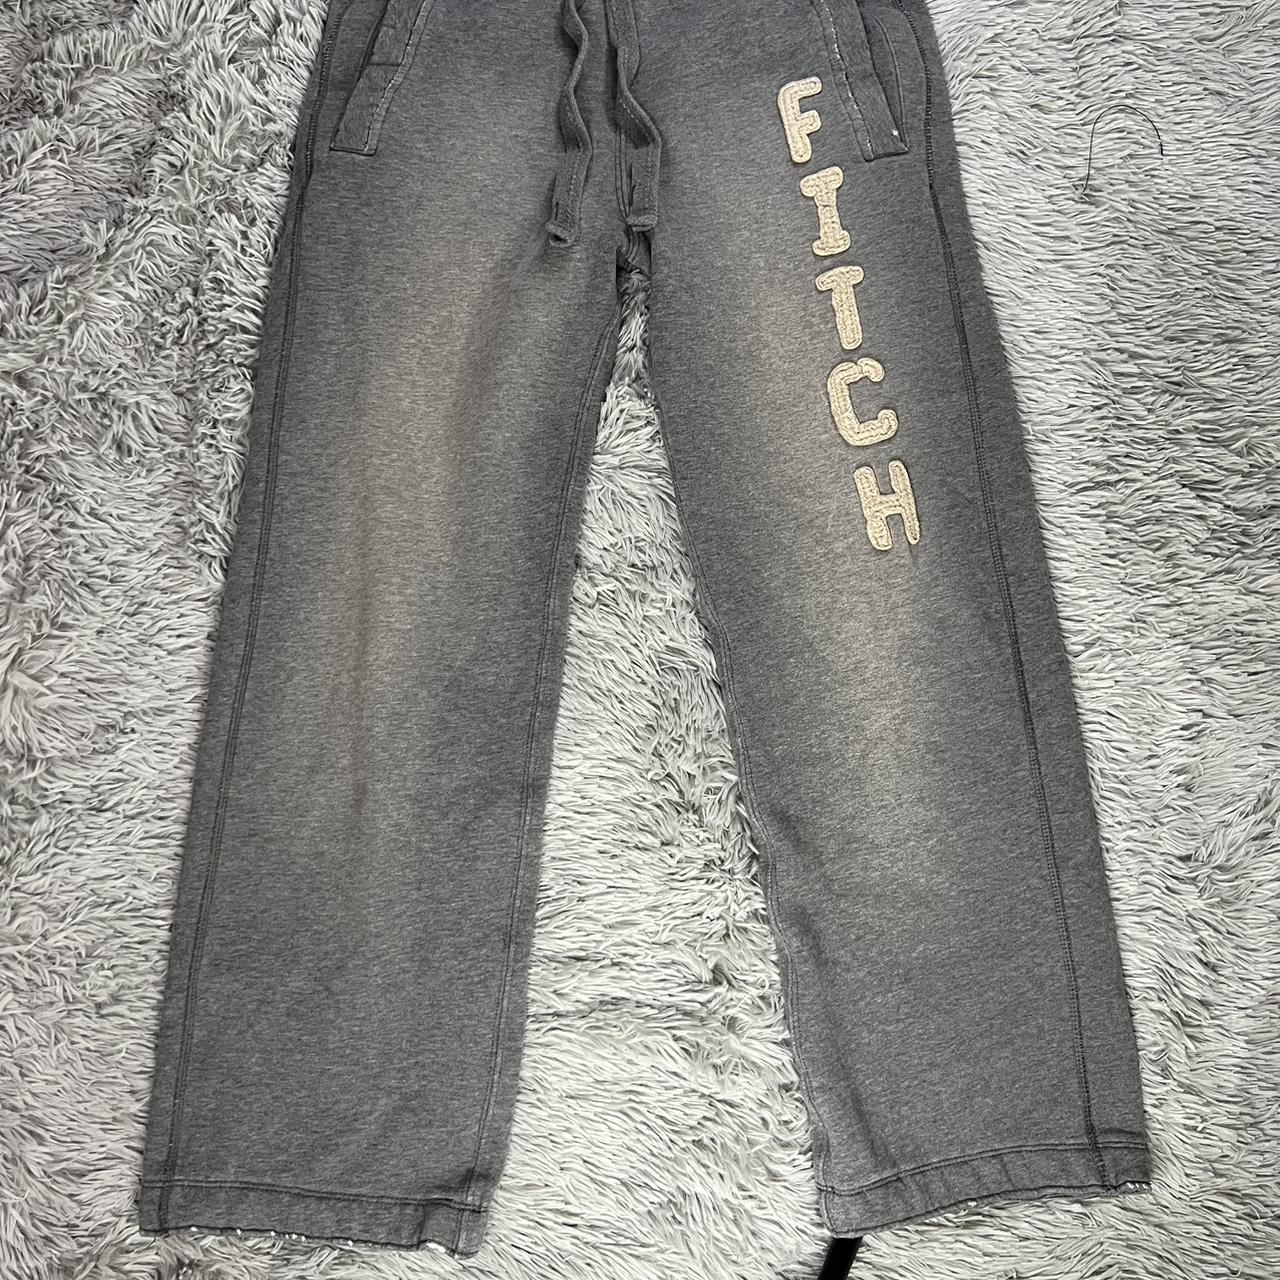 Abercrombie & Fitch Joggers In great condition Dm... - Depop